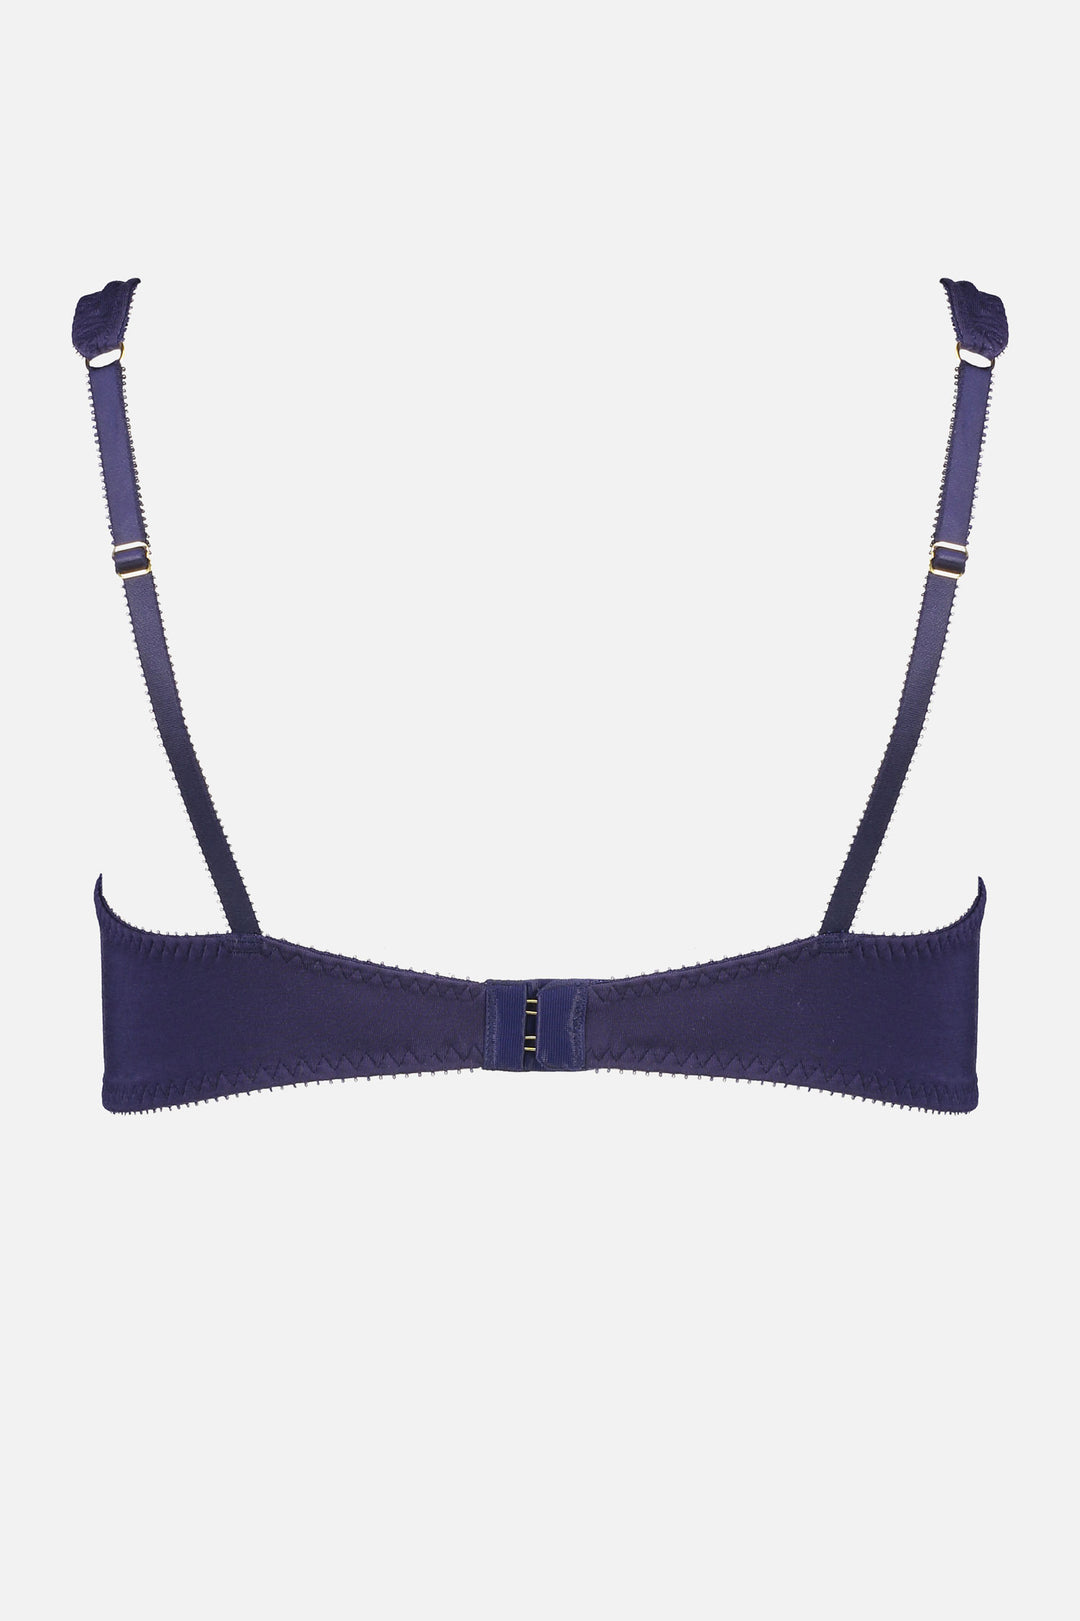 Videris Lingerie Sarah underwire free soft cup bra in navy TENCEL™ features adjustable back straps and hook and eyes closure